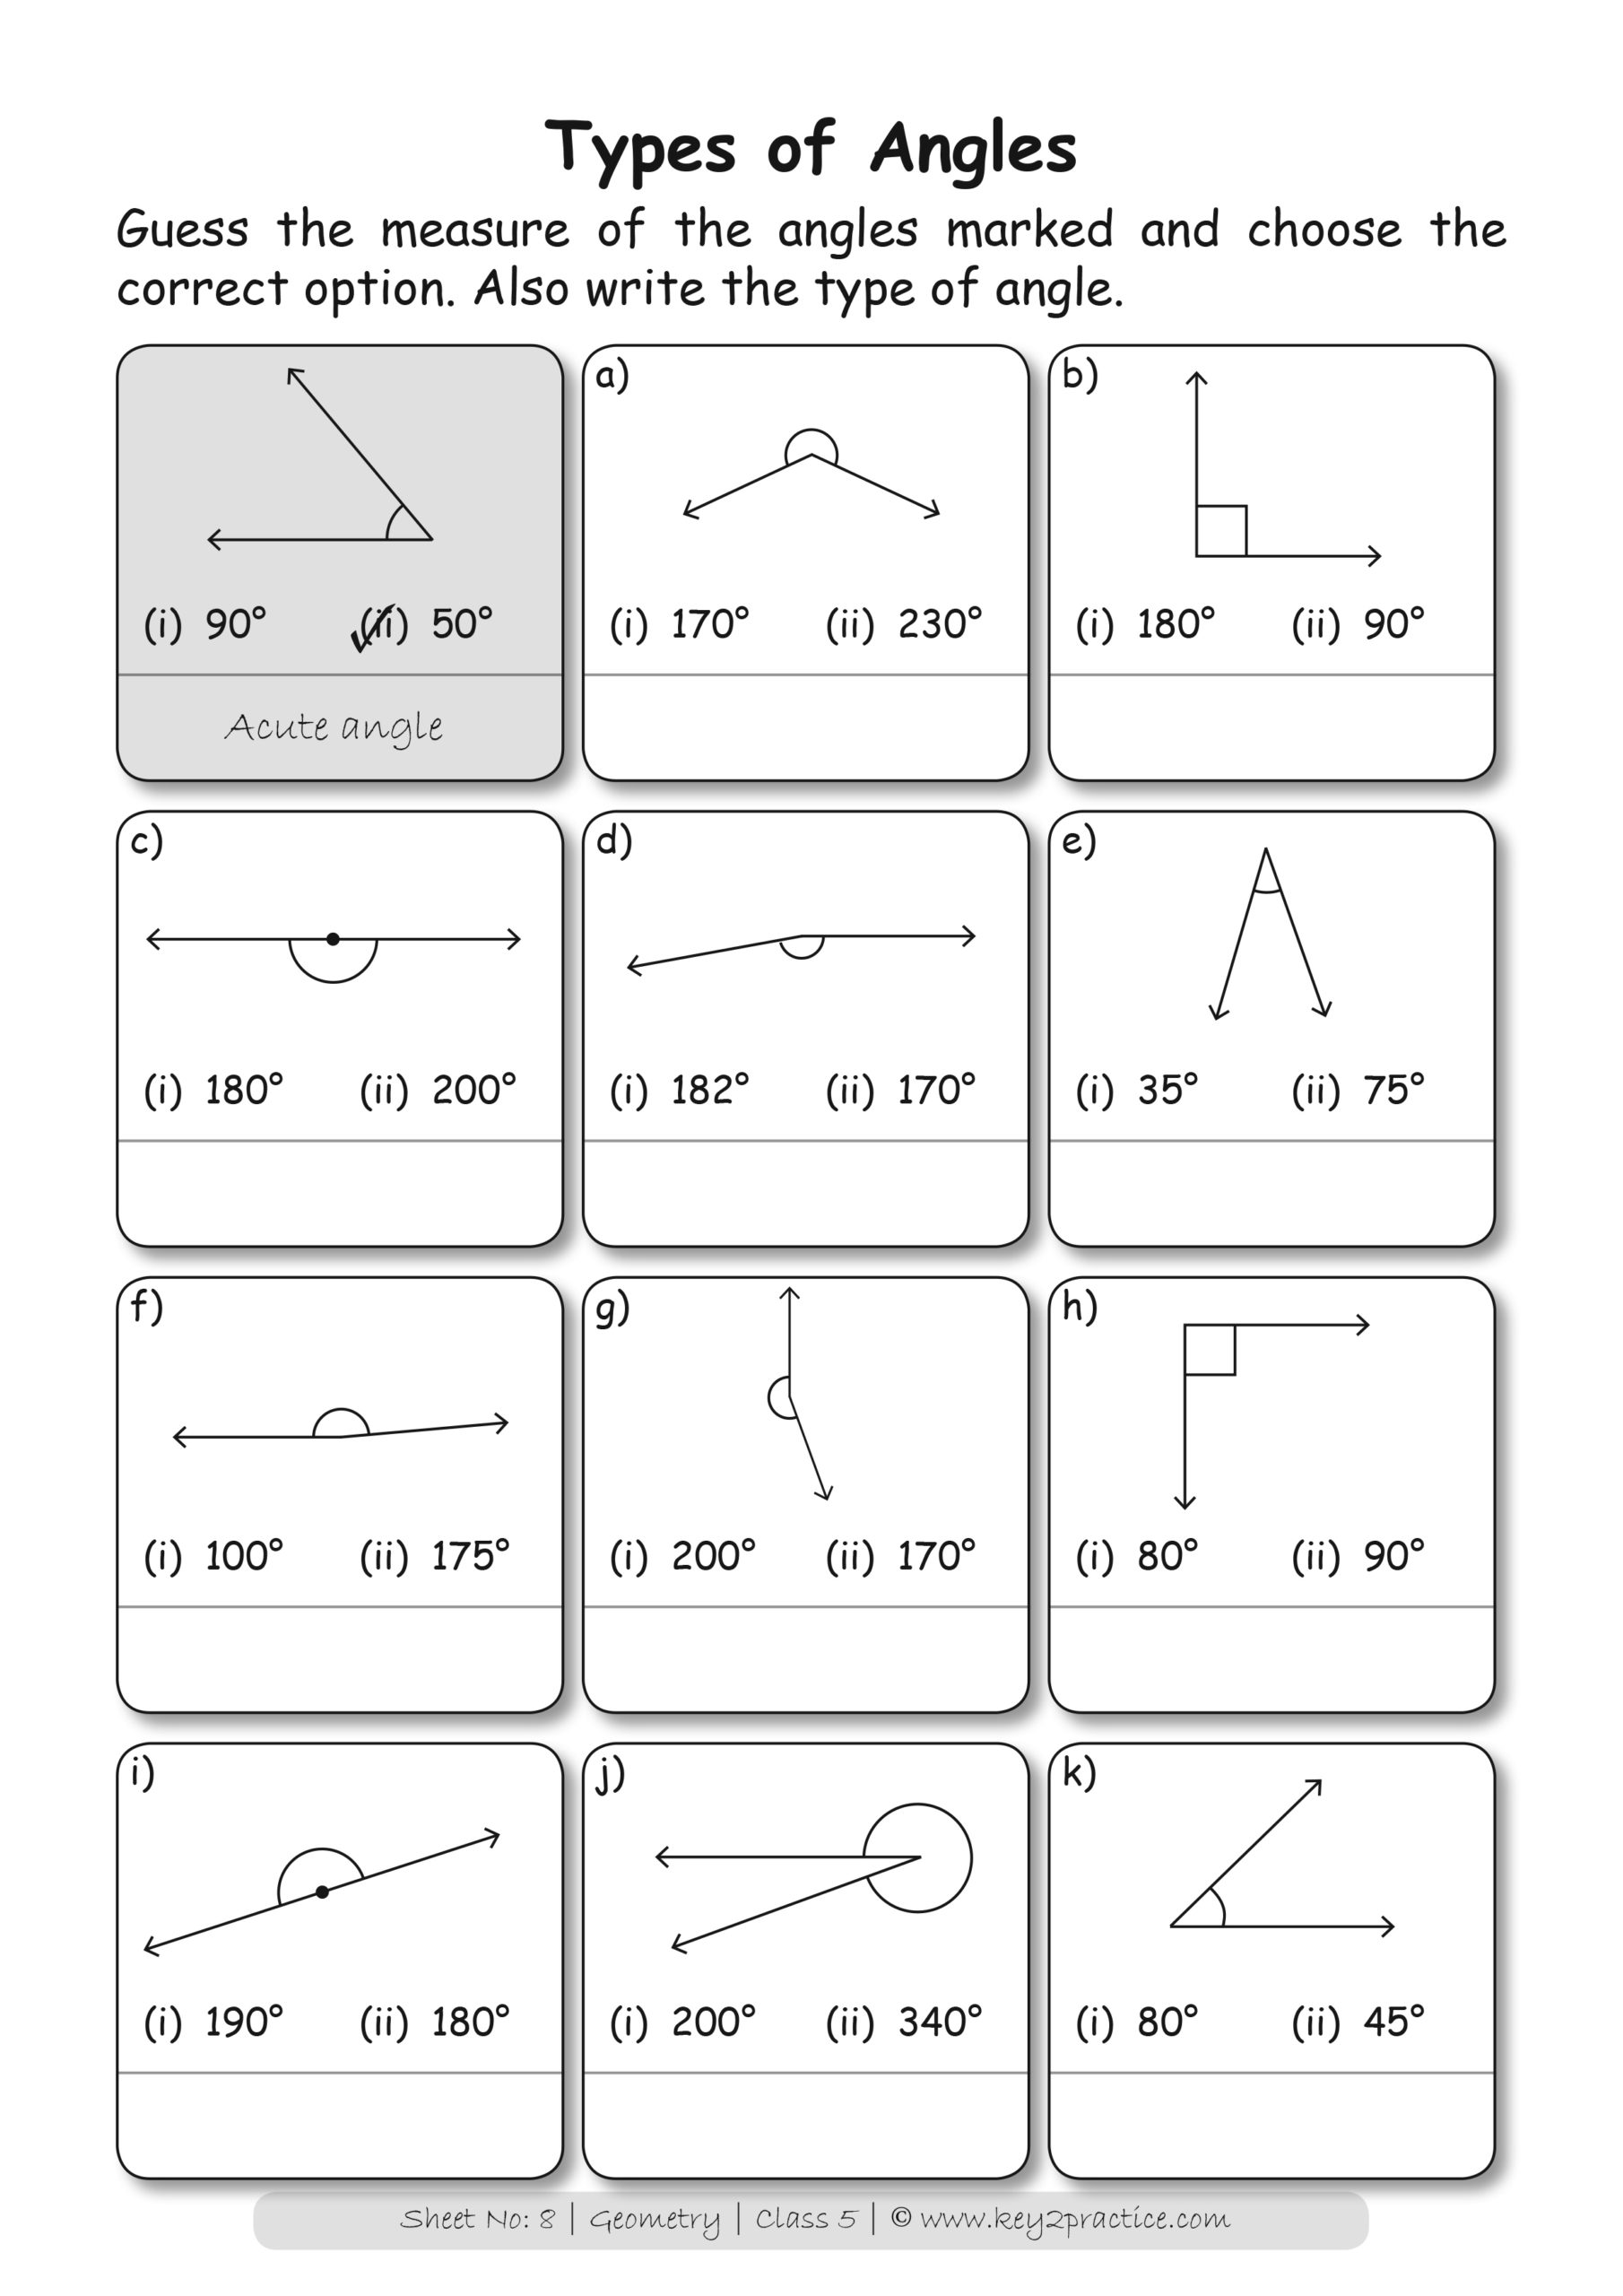 chapter 7 lesson 1 homework practice classify angles